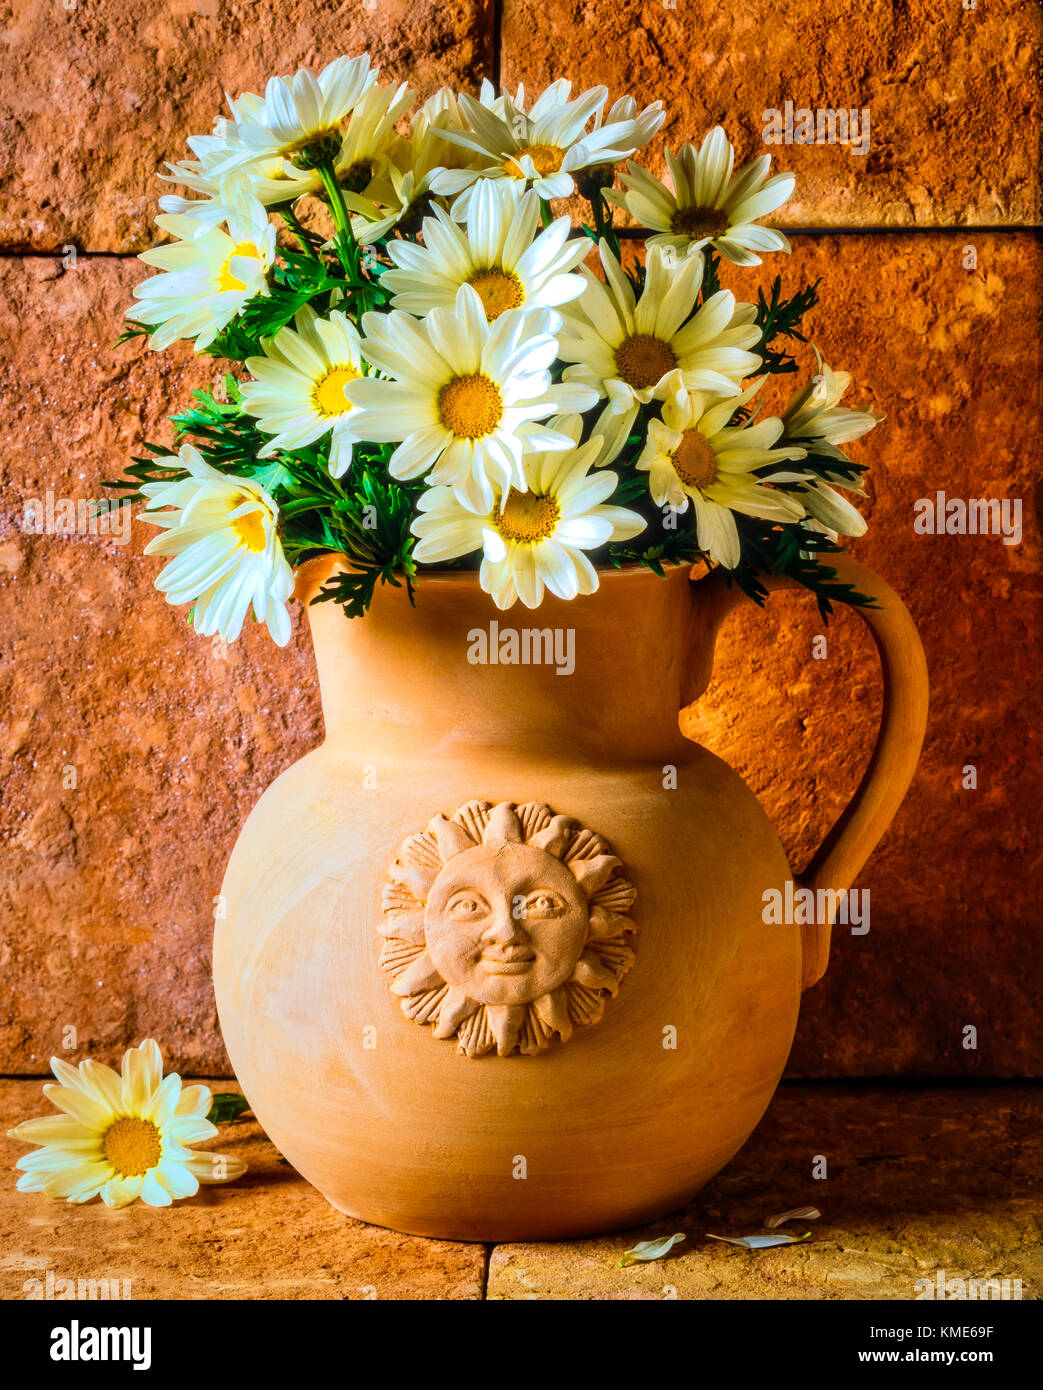 Clay Pitcher With Daises Stock Photo